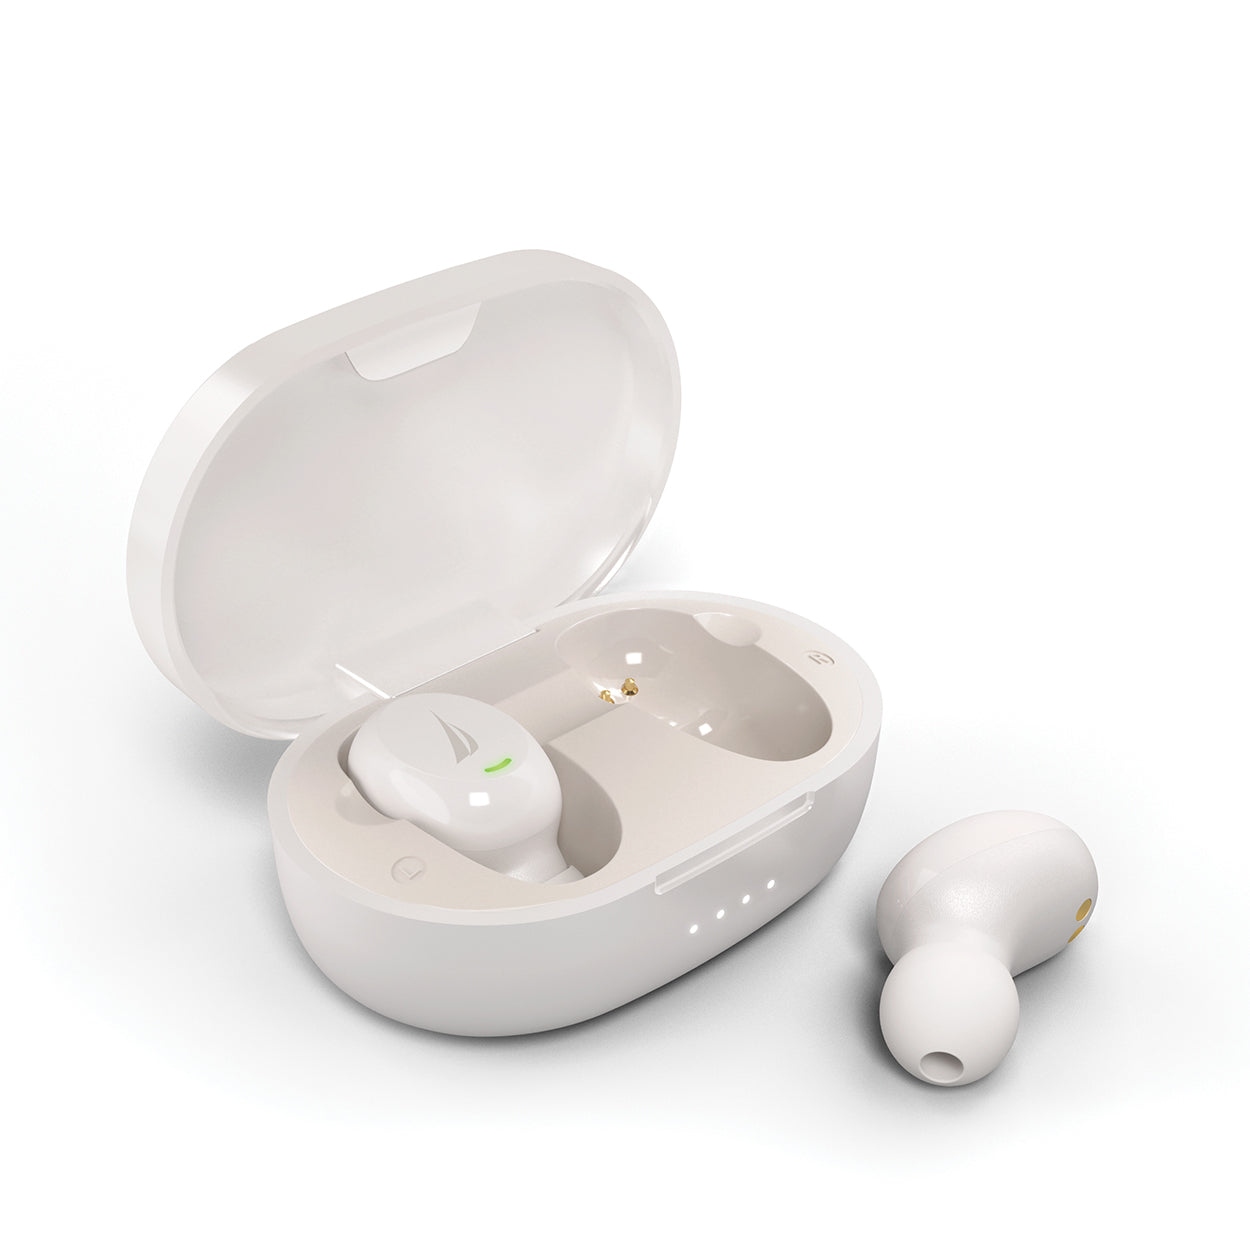 Nautica True Wireless Stereo Earbuds with Charging Case T120